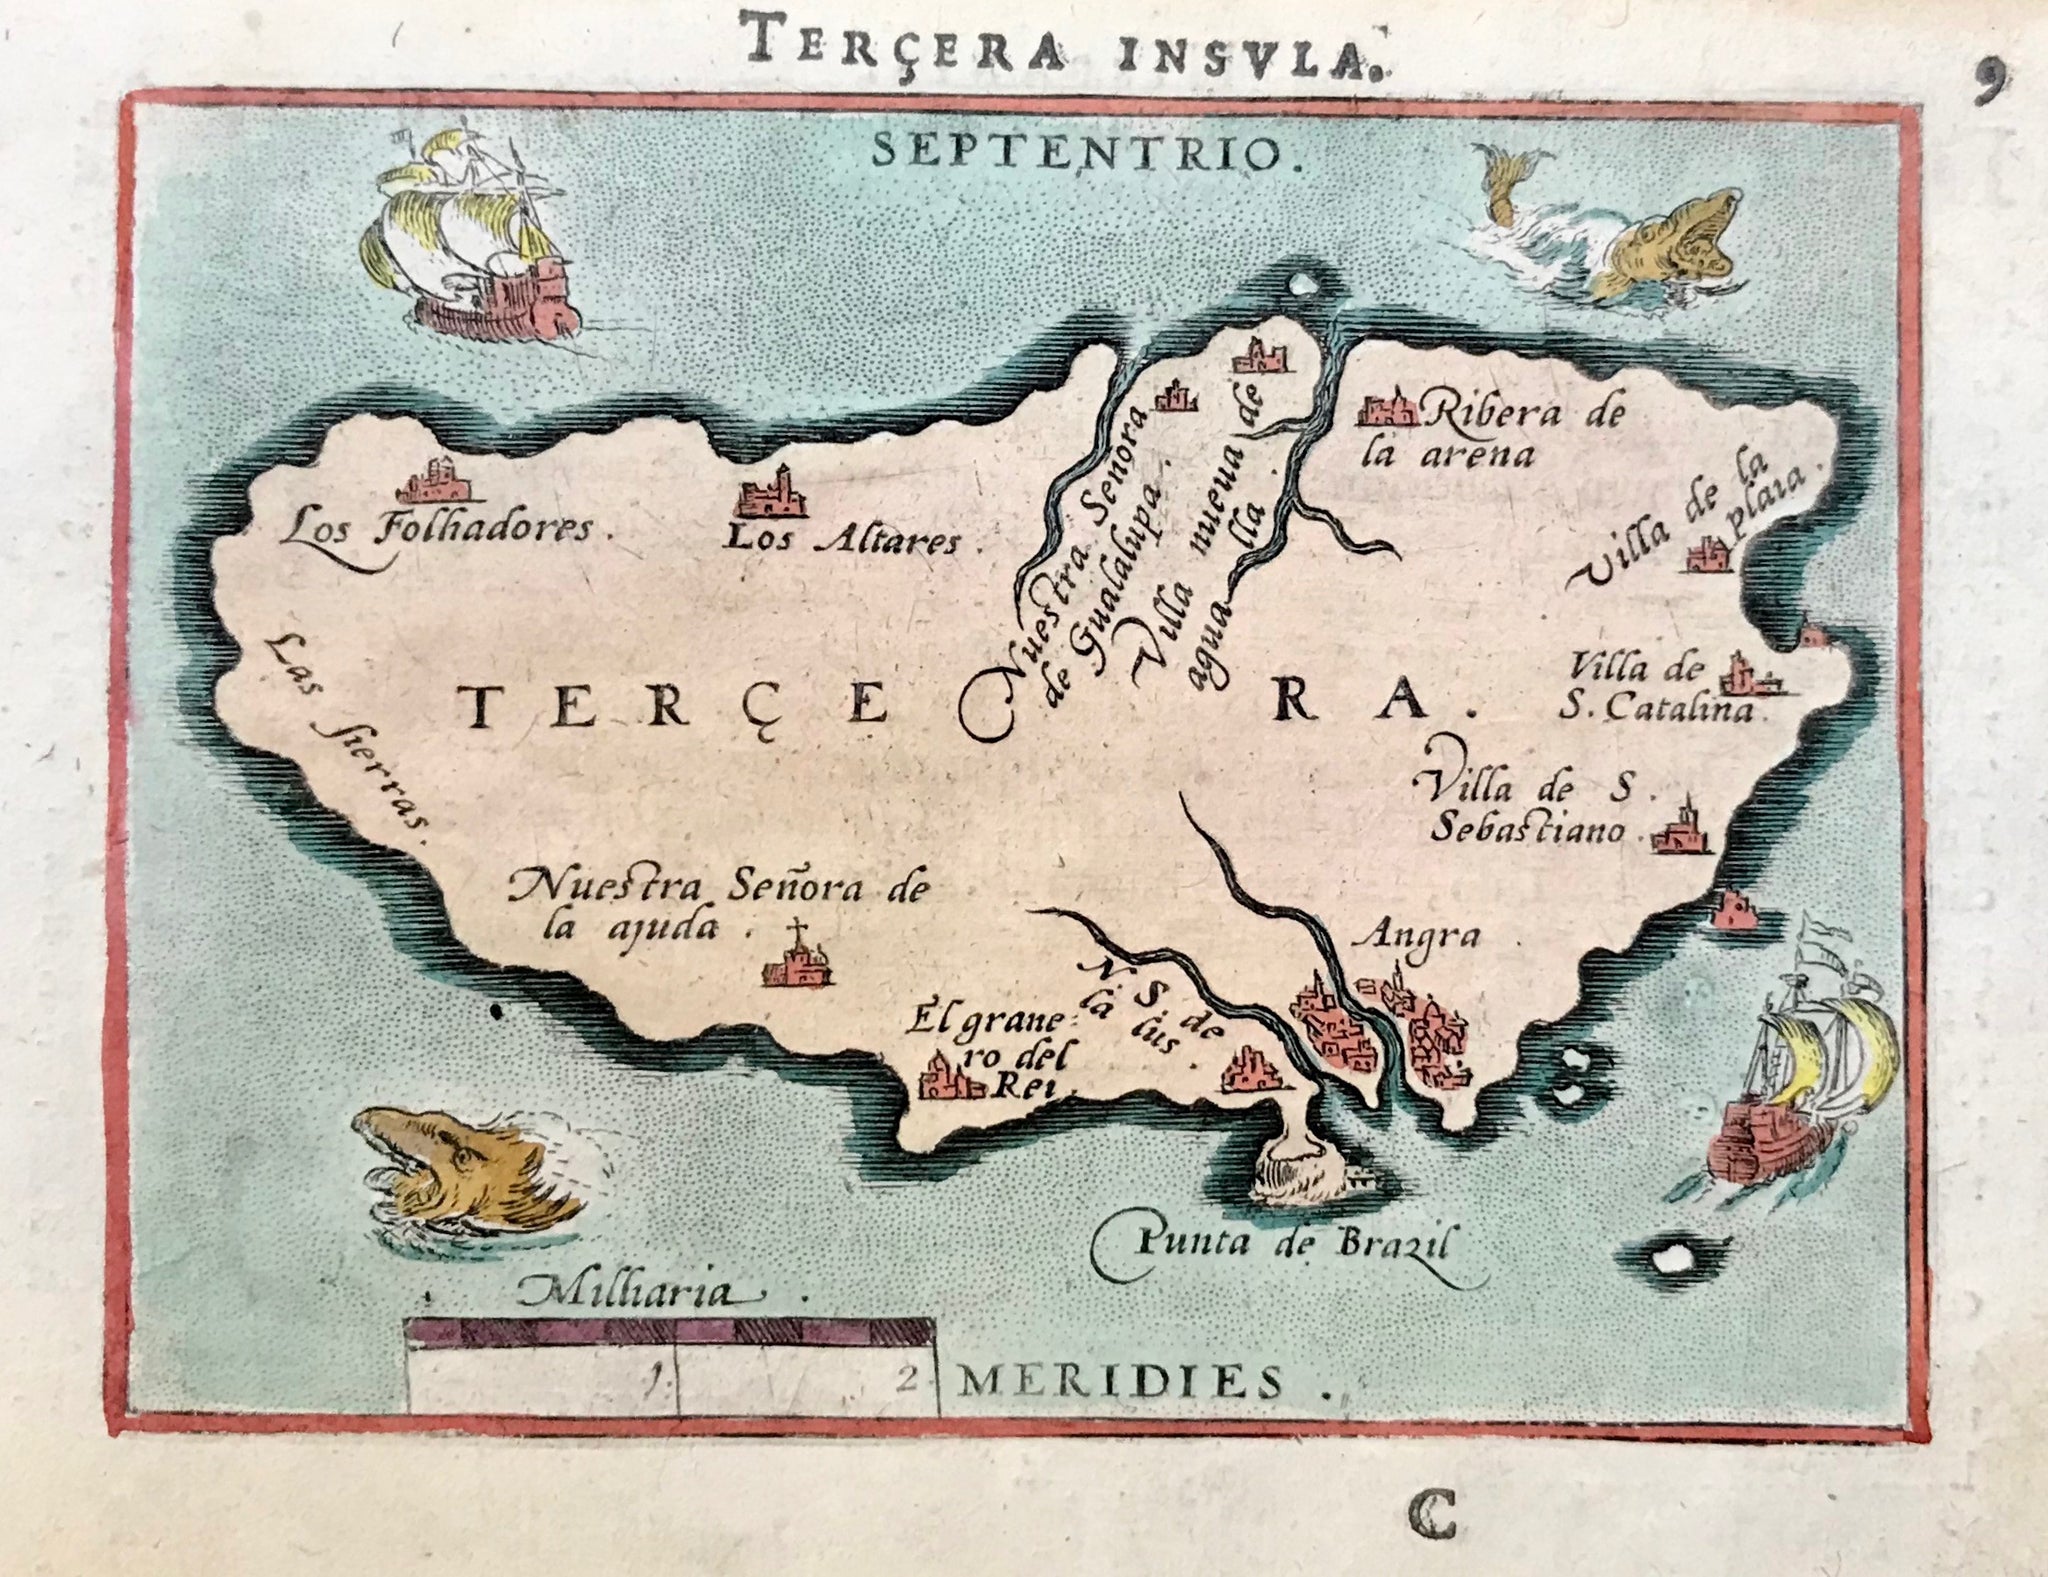 Portugal ,Azores, Terceira, Grupo central  Azores. - "Terceira Insula" Hand-colored copper etching. Published in the pocket atlas by Abraham Ortelius (1527-1598) Antwerp, 1587  The island chart decorated with two sail ships and two sea monsters. Verso text for "Spain" in Latin Language. Island print a bit awrily placed on paper.